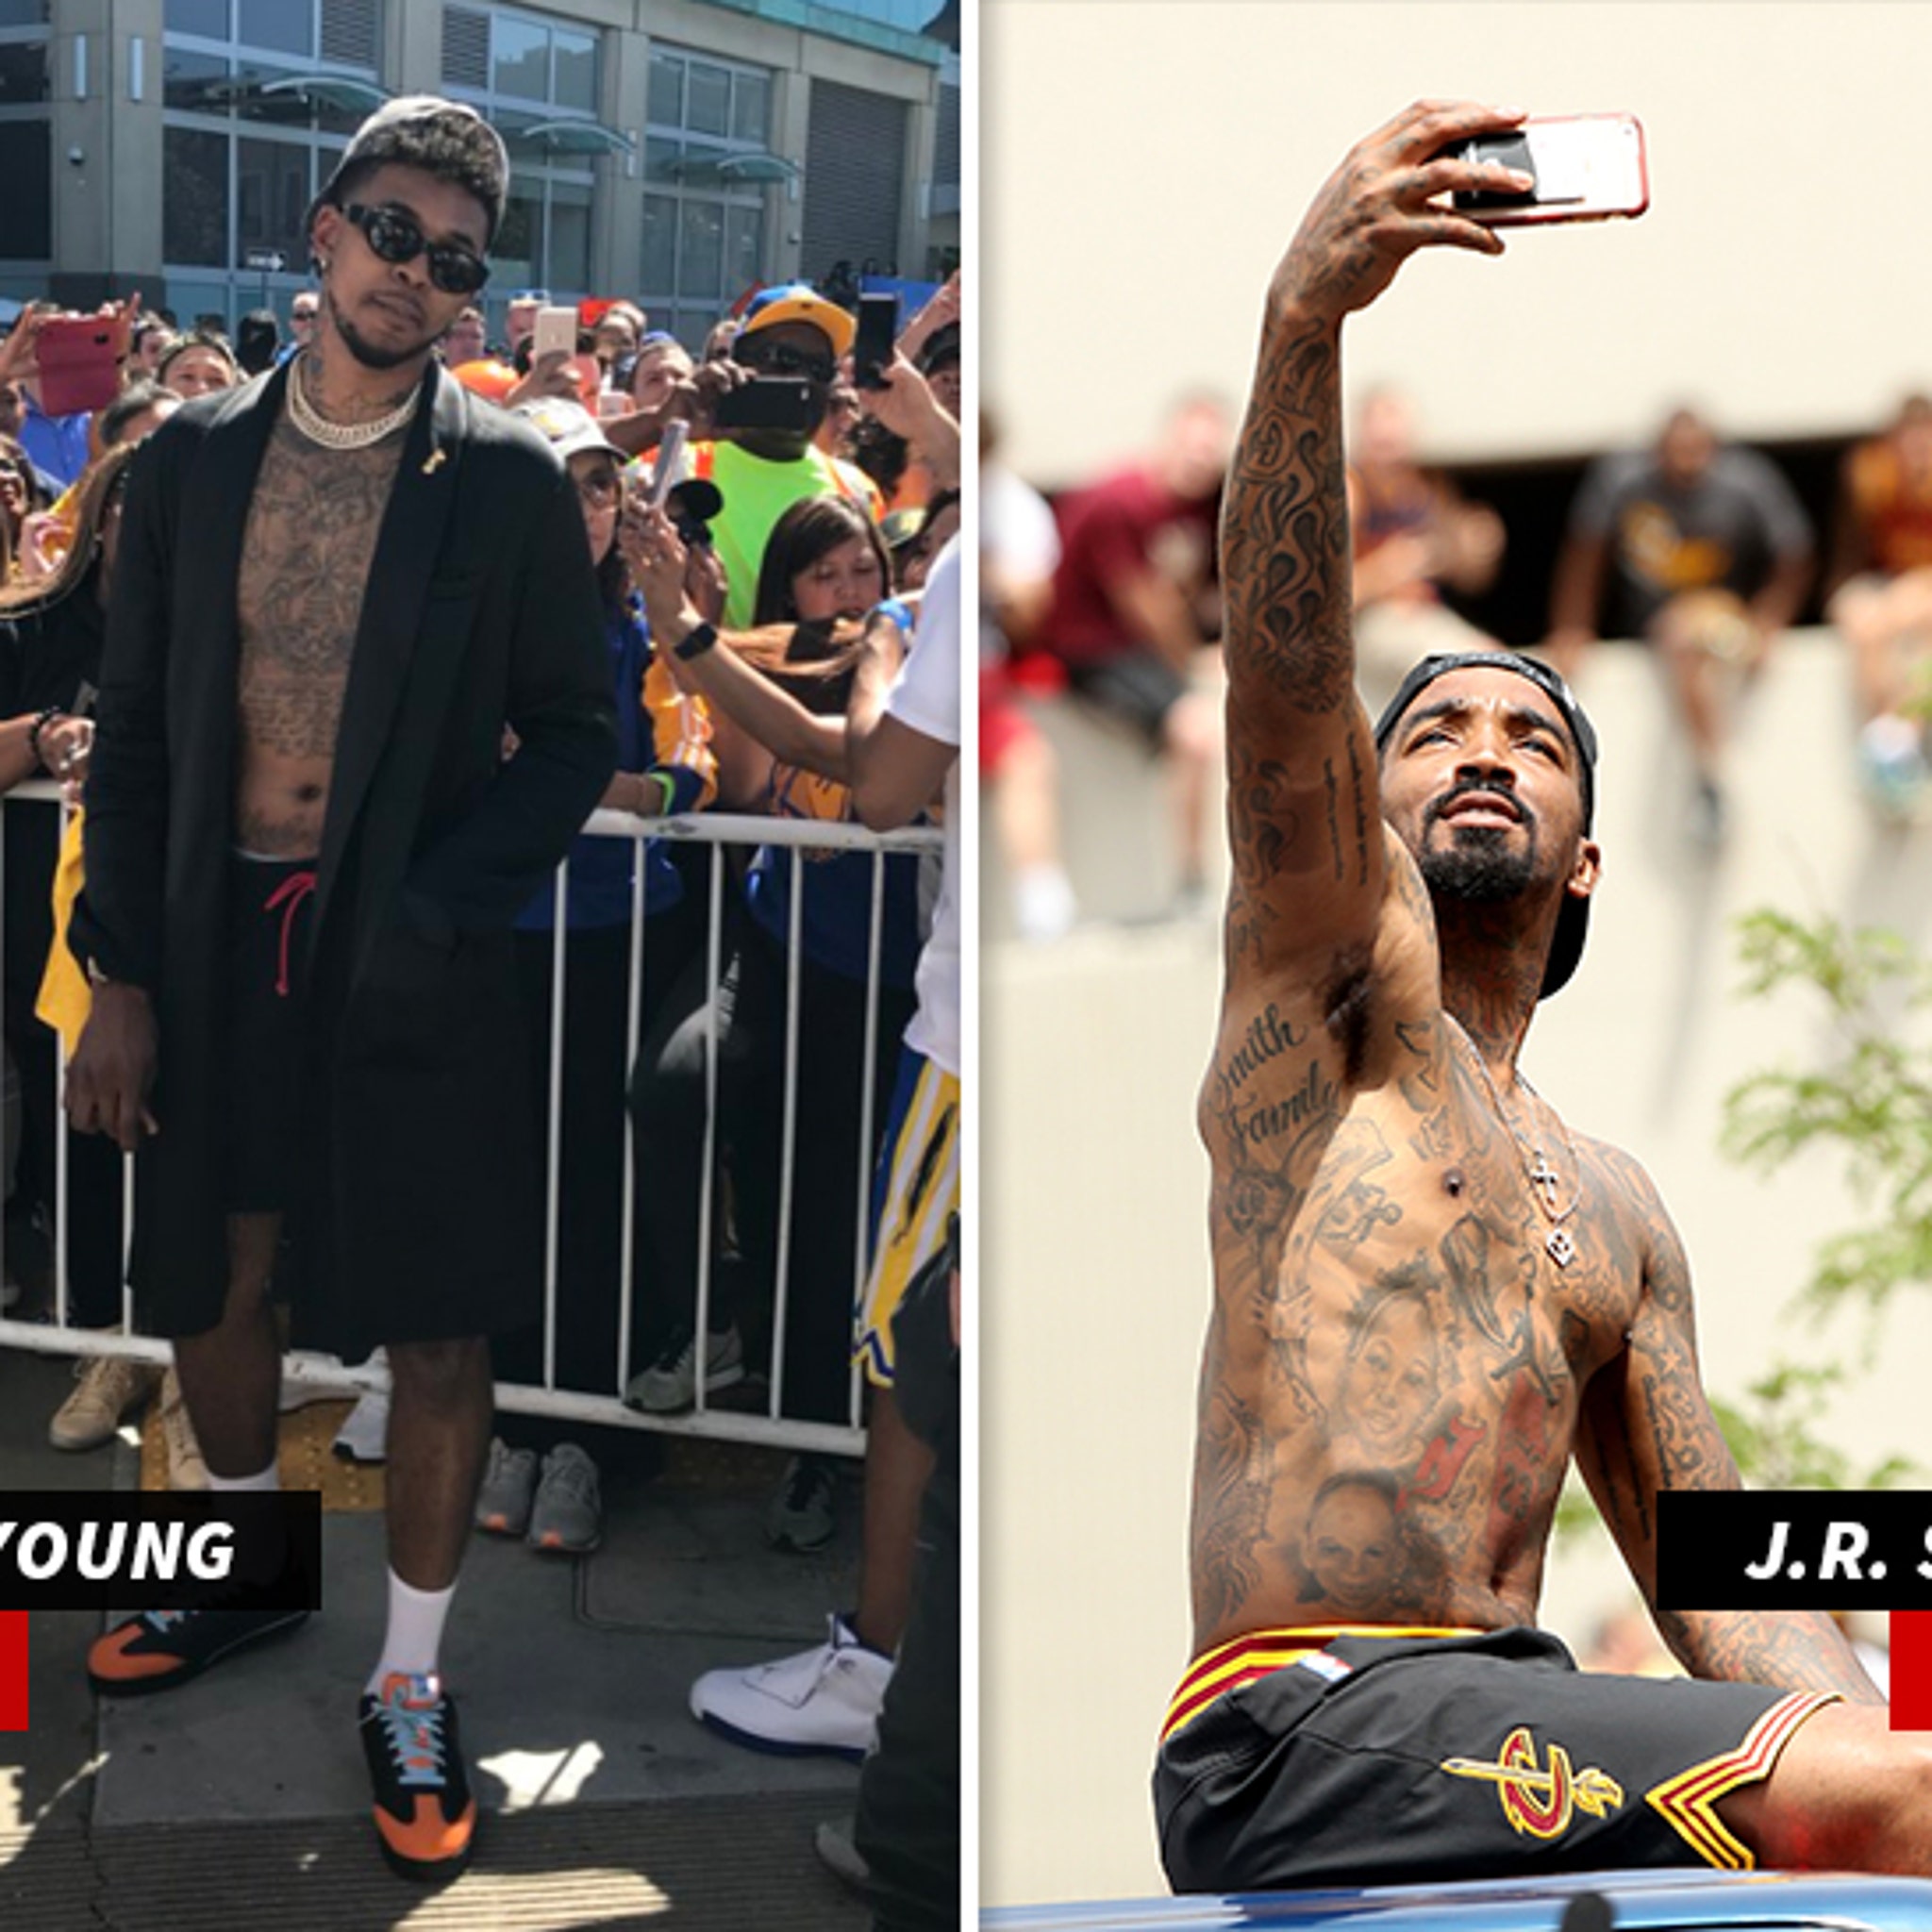 Nick Young Takes on J.R. Smith in NBA Parade Edition of 'Who Wore it Better